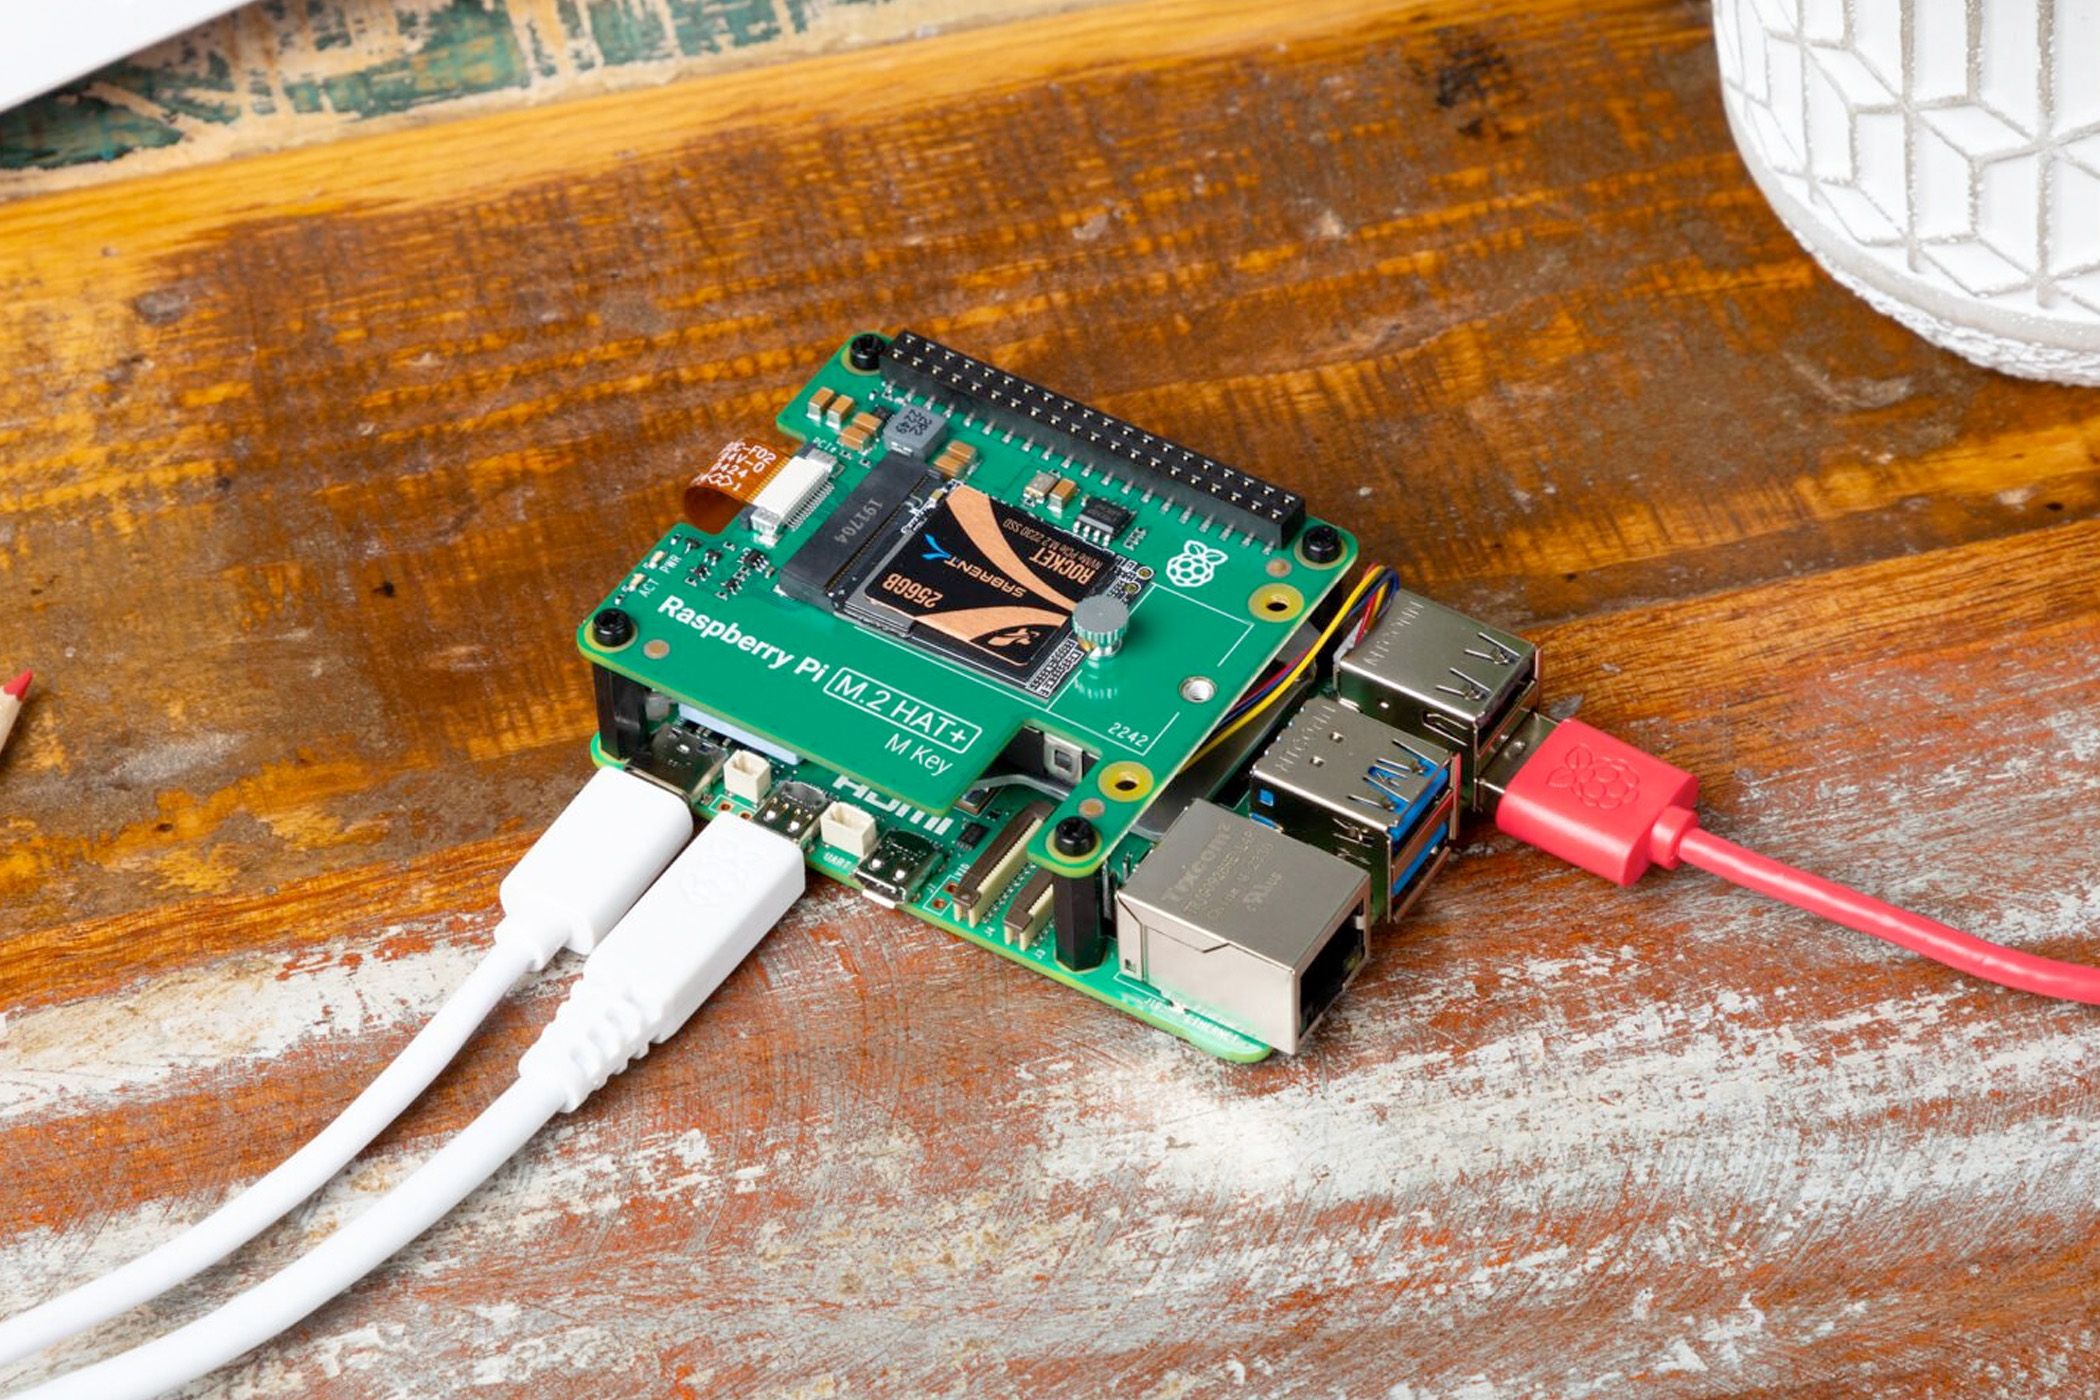 Raspberry Pi computer on a wooden surface with cables connected.